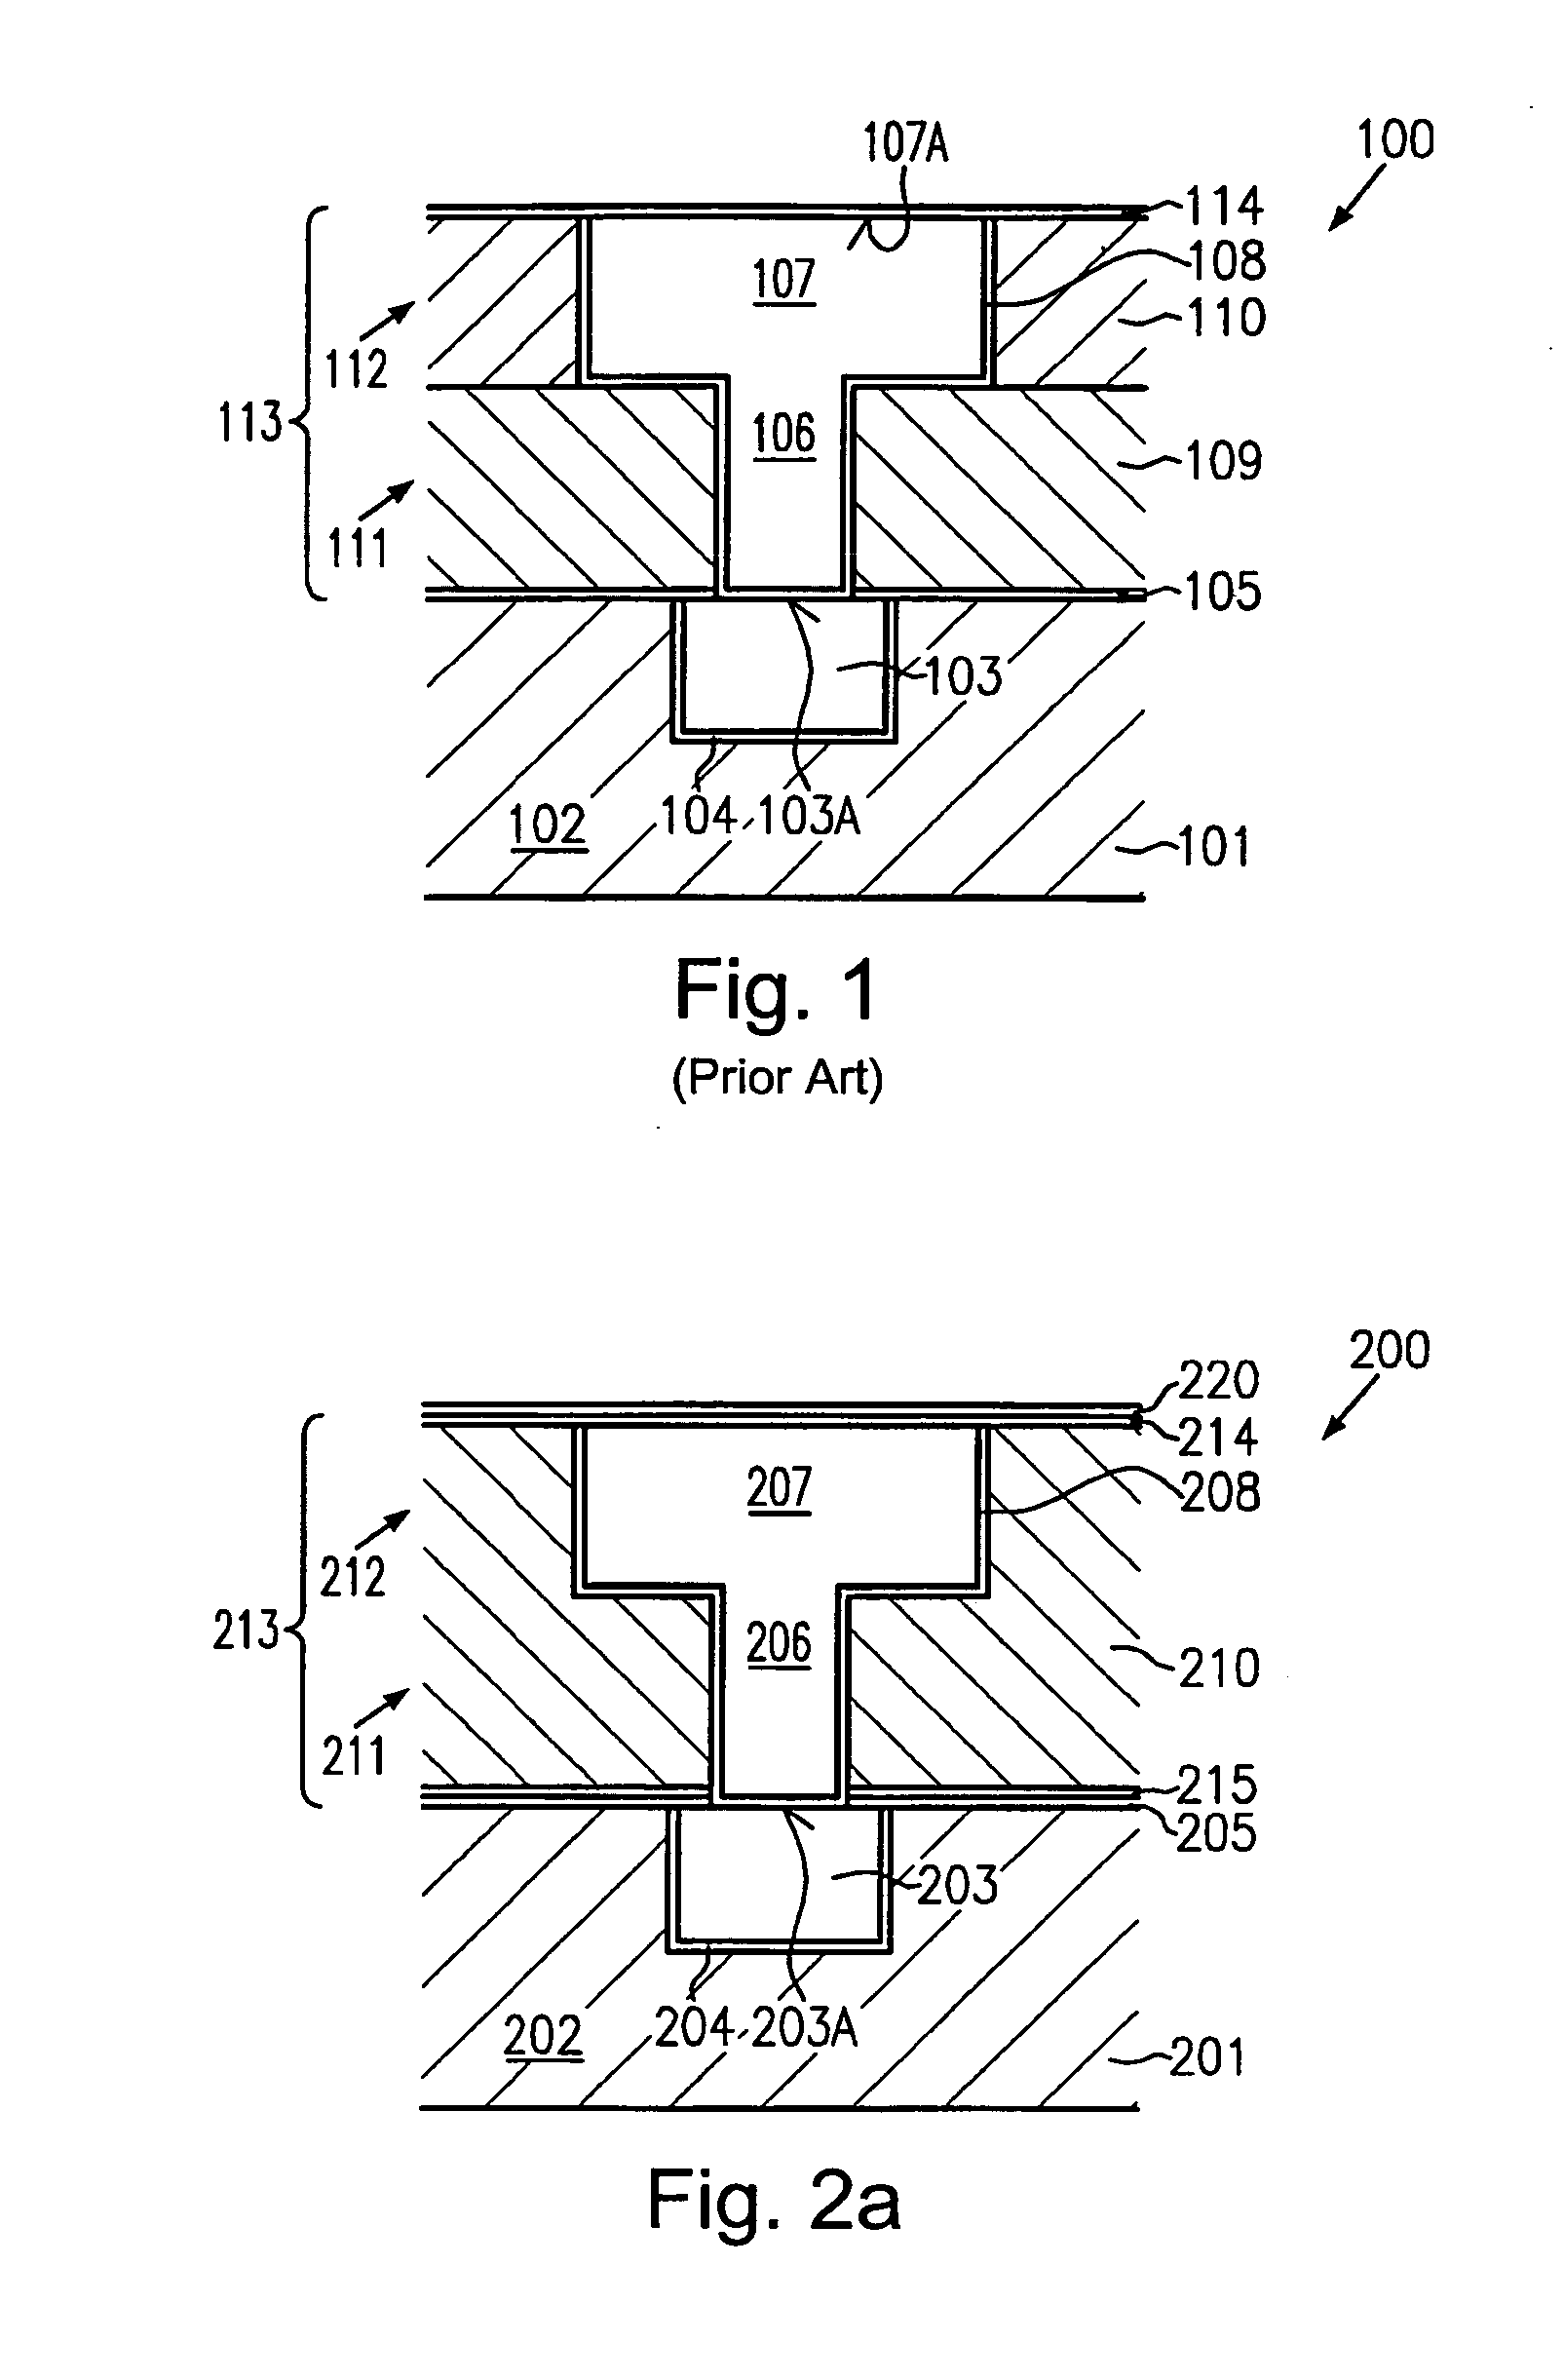 Semiconductor device including a low-k metallization layer stack for enhanced resistance against electromigration